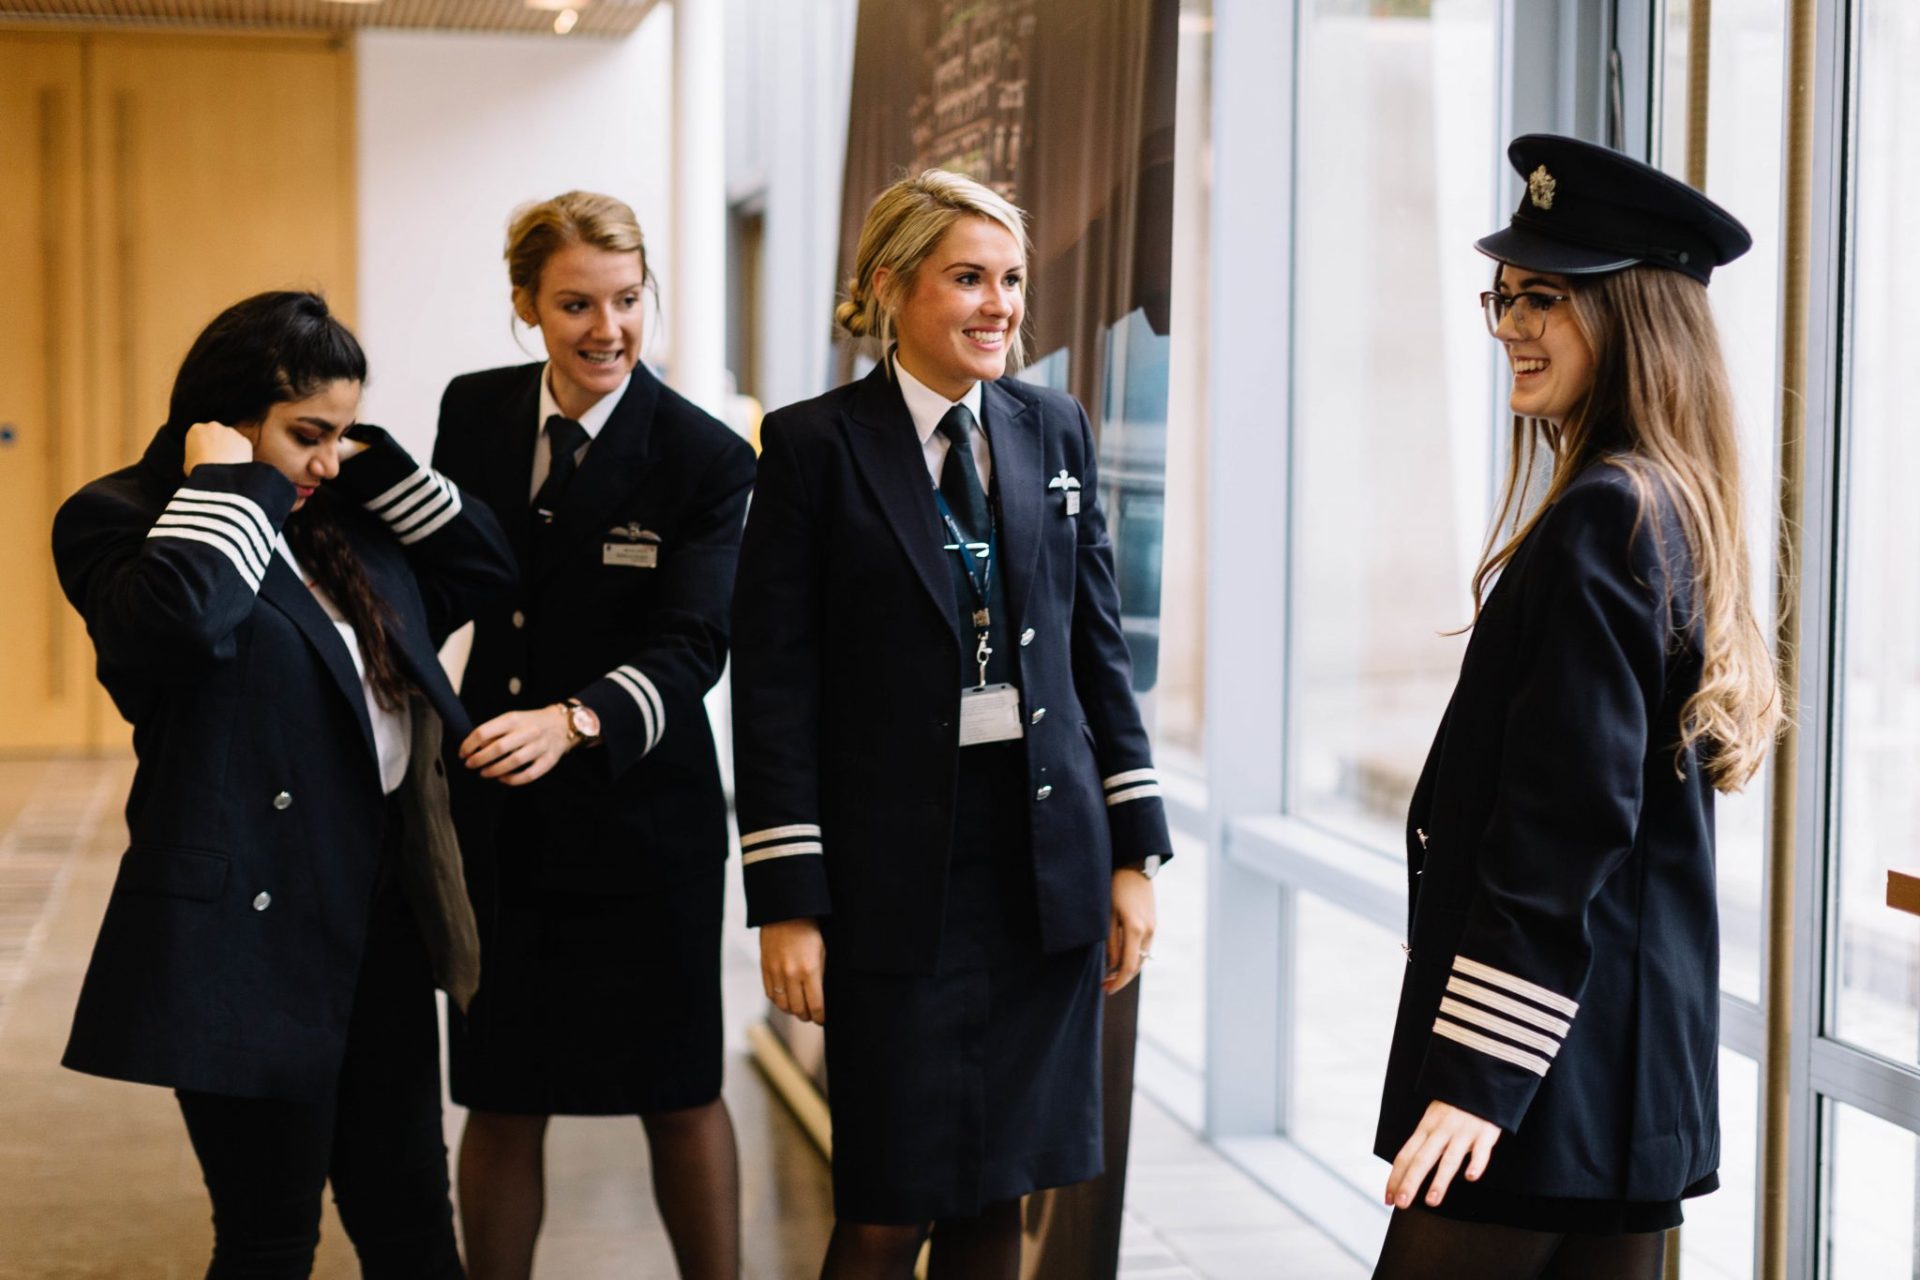 Pilots were on hand to share their experiences and answer questions (Image: BA/Stuart Bailey)